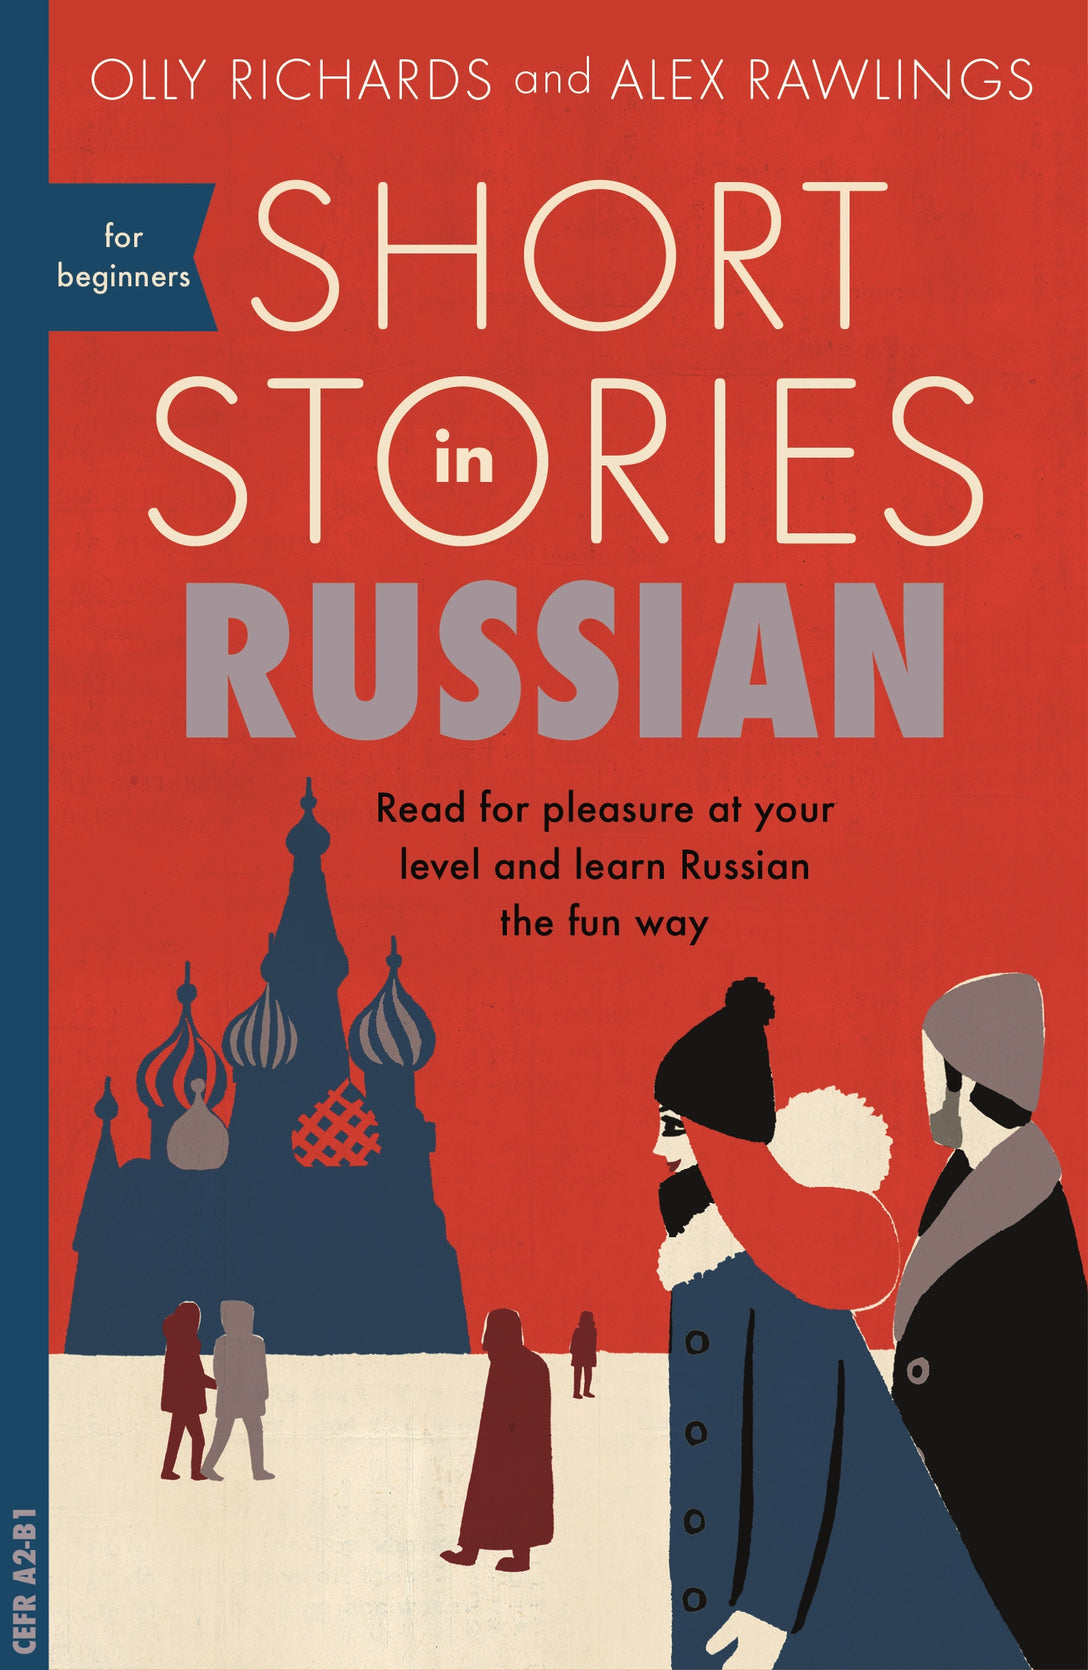 Short Stories in Russian for Beginners by Olly Richards, Alex Rawlings